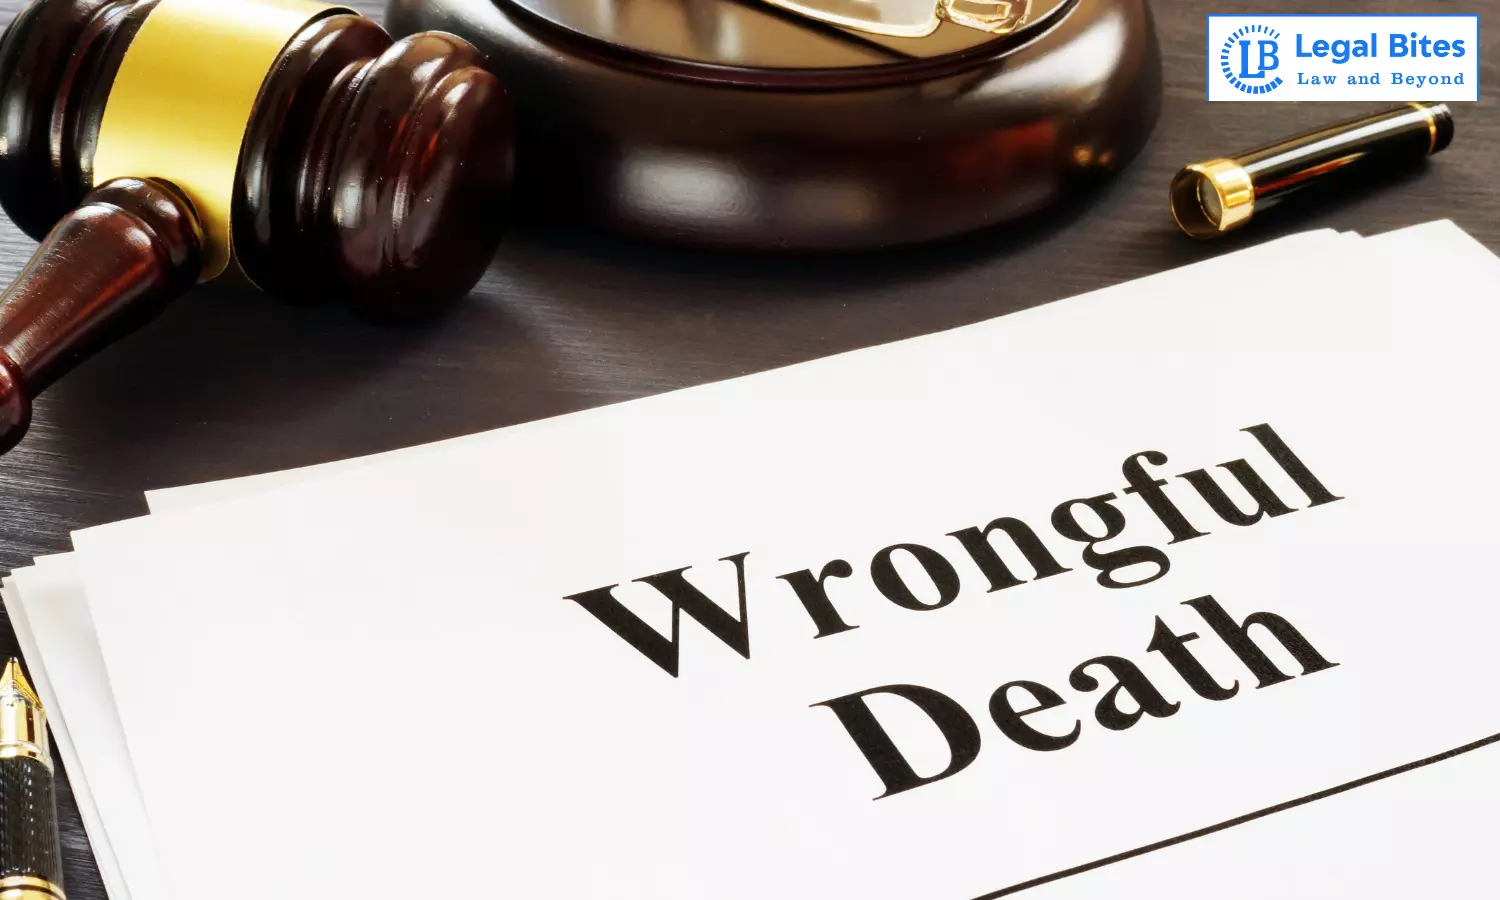 4-Point Checklist: Filing a Wrongful Death Lawsuit